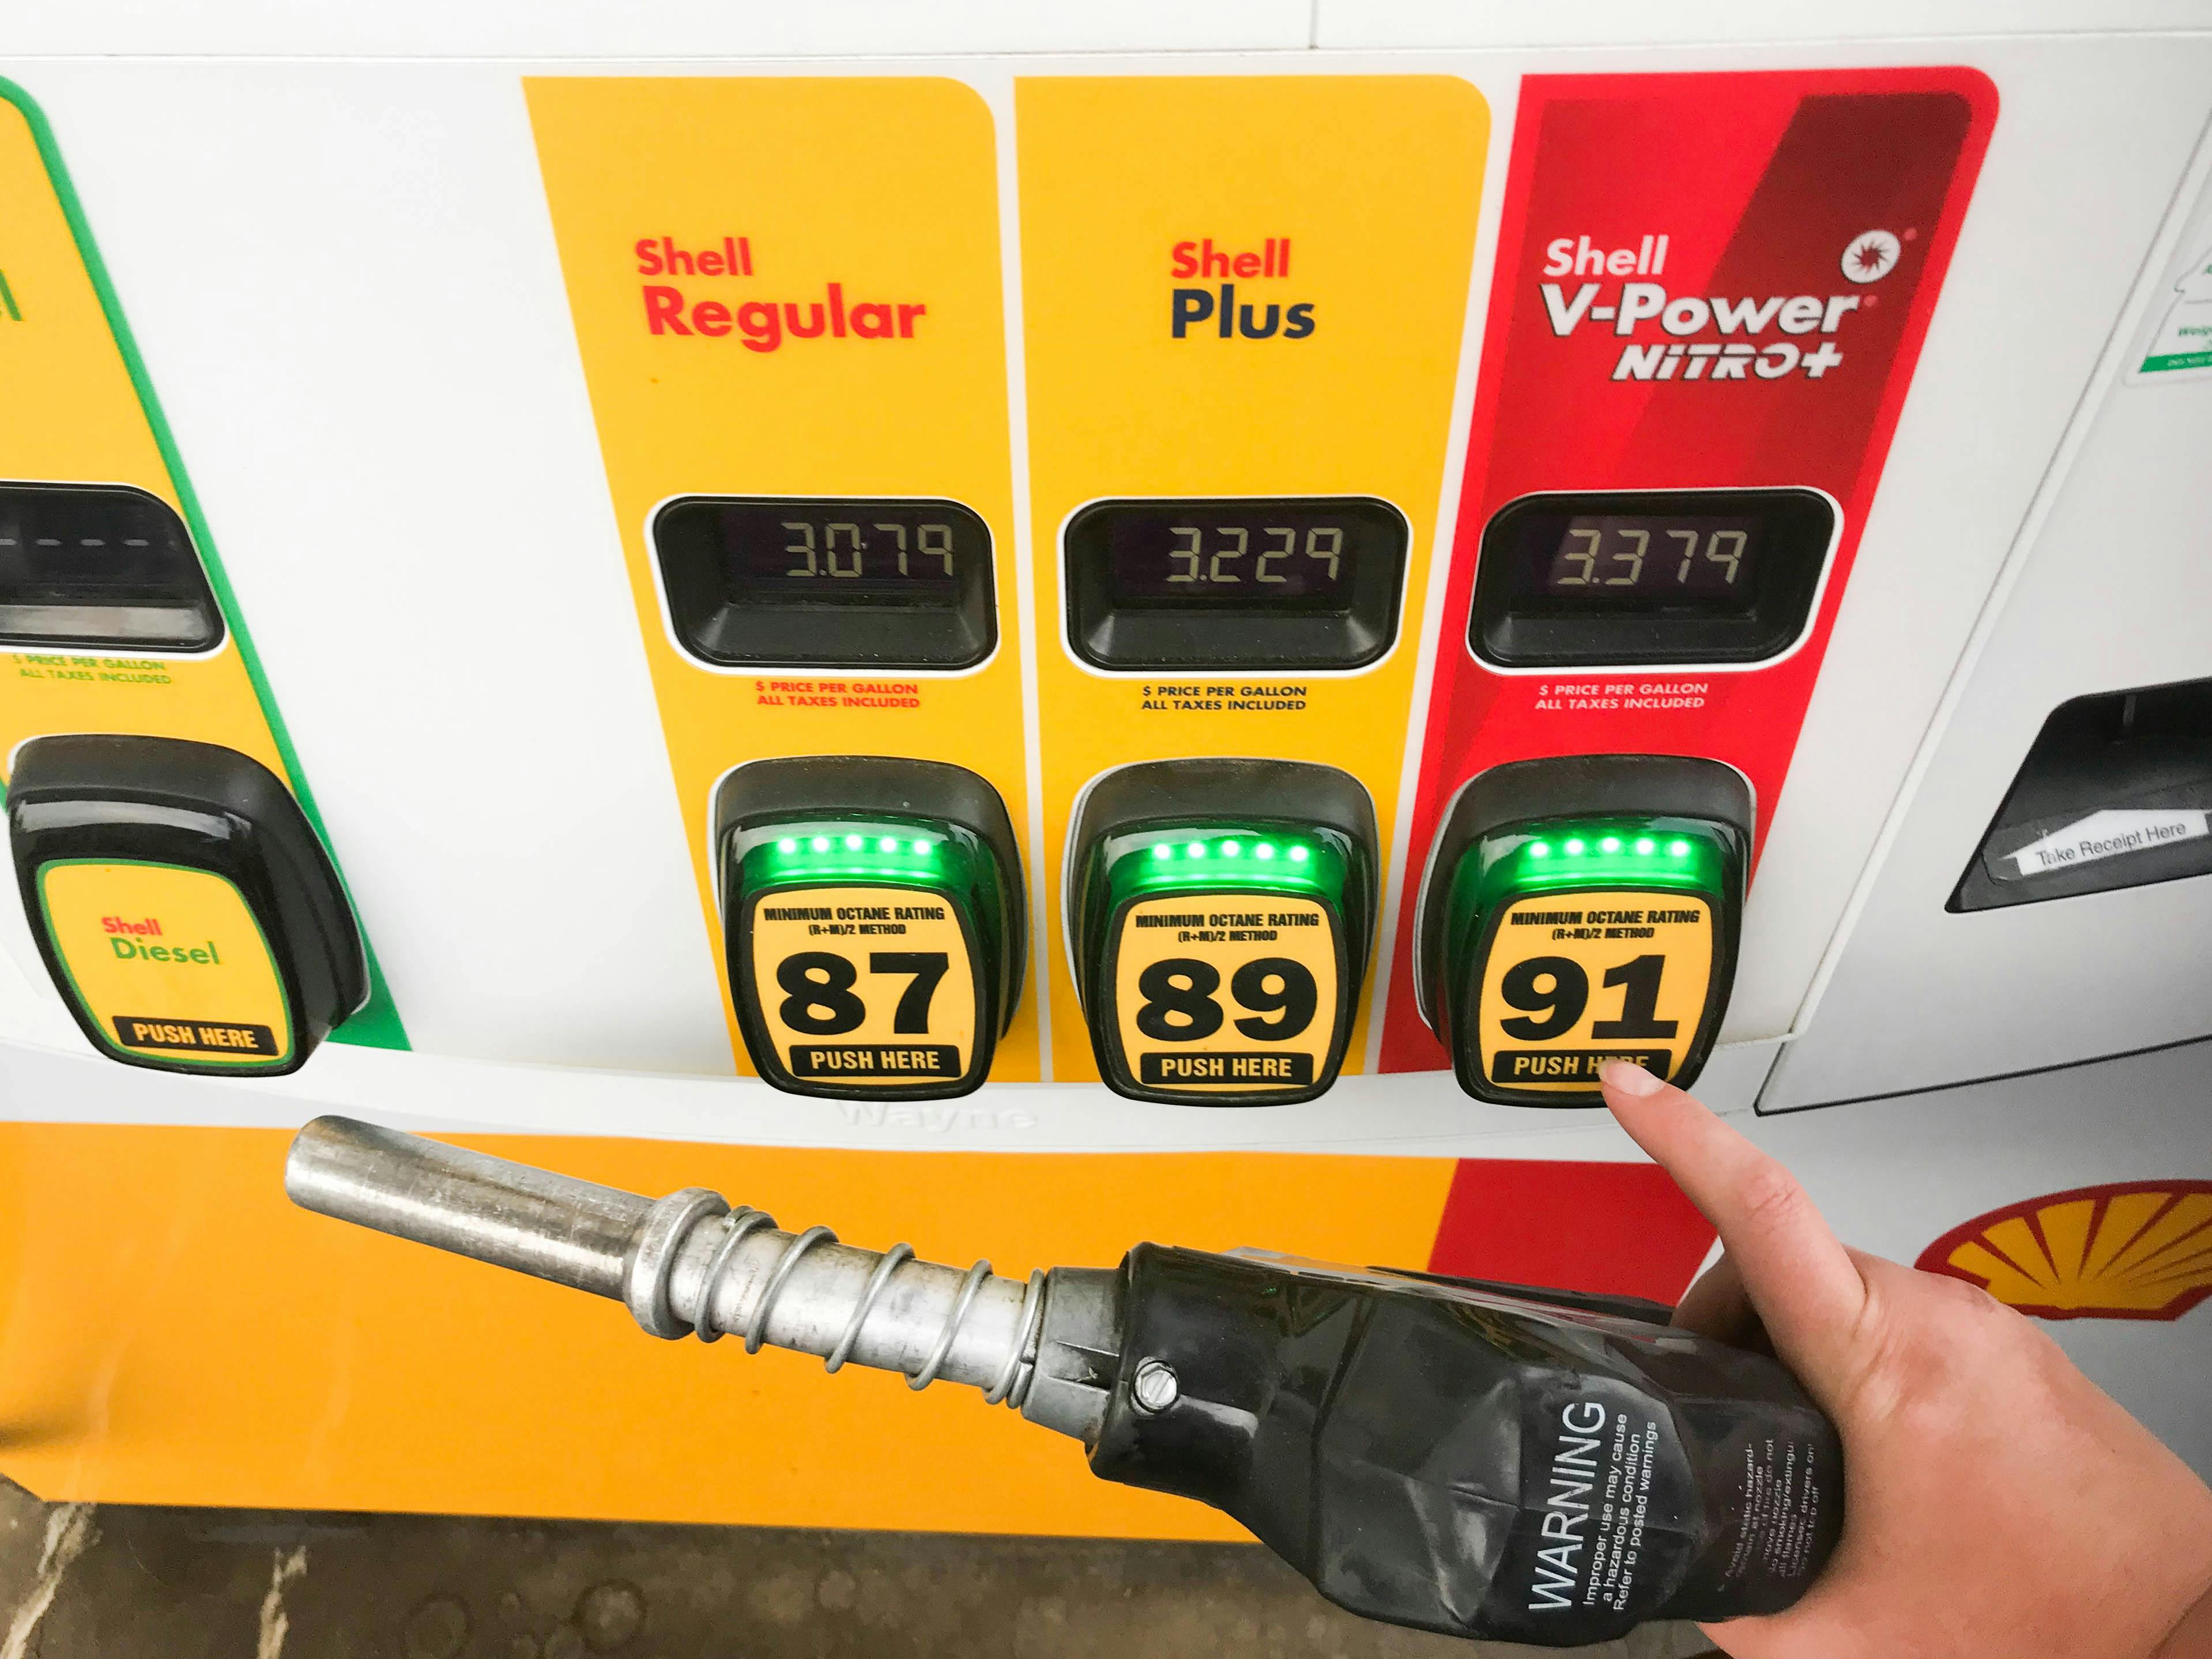 A person's hand holding a gas pump nozzle and choosing their type of gas at a Shell gas station.